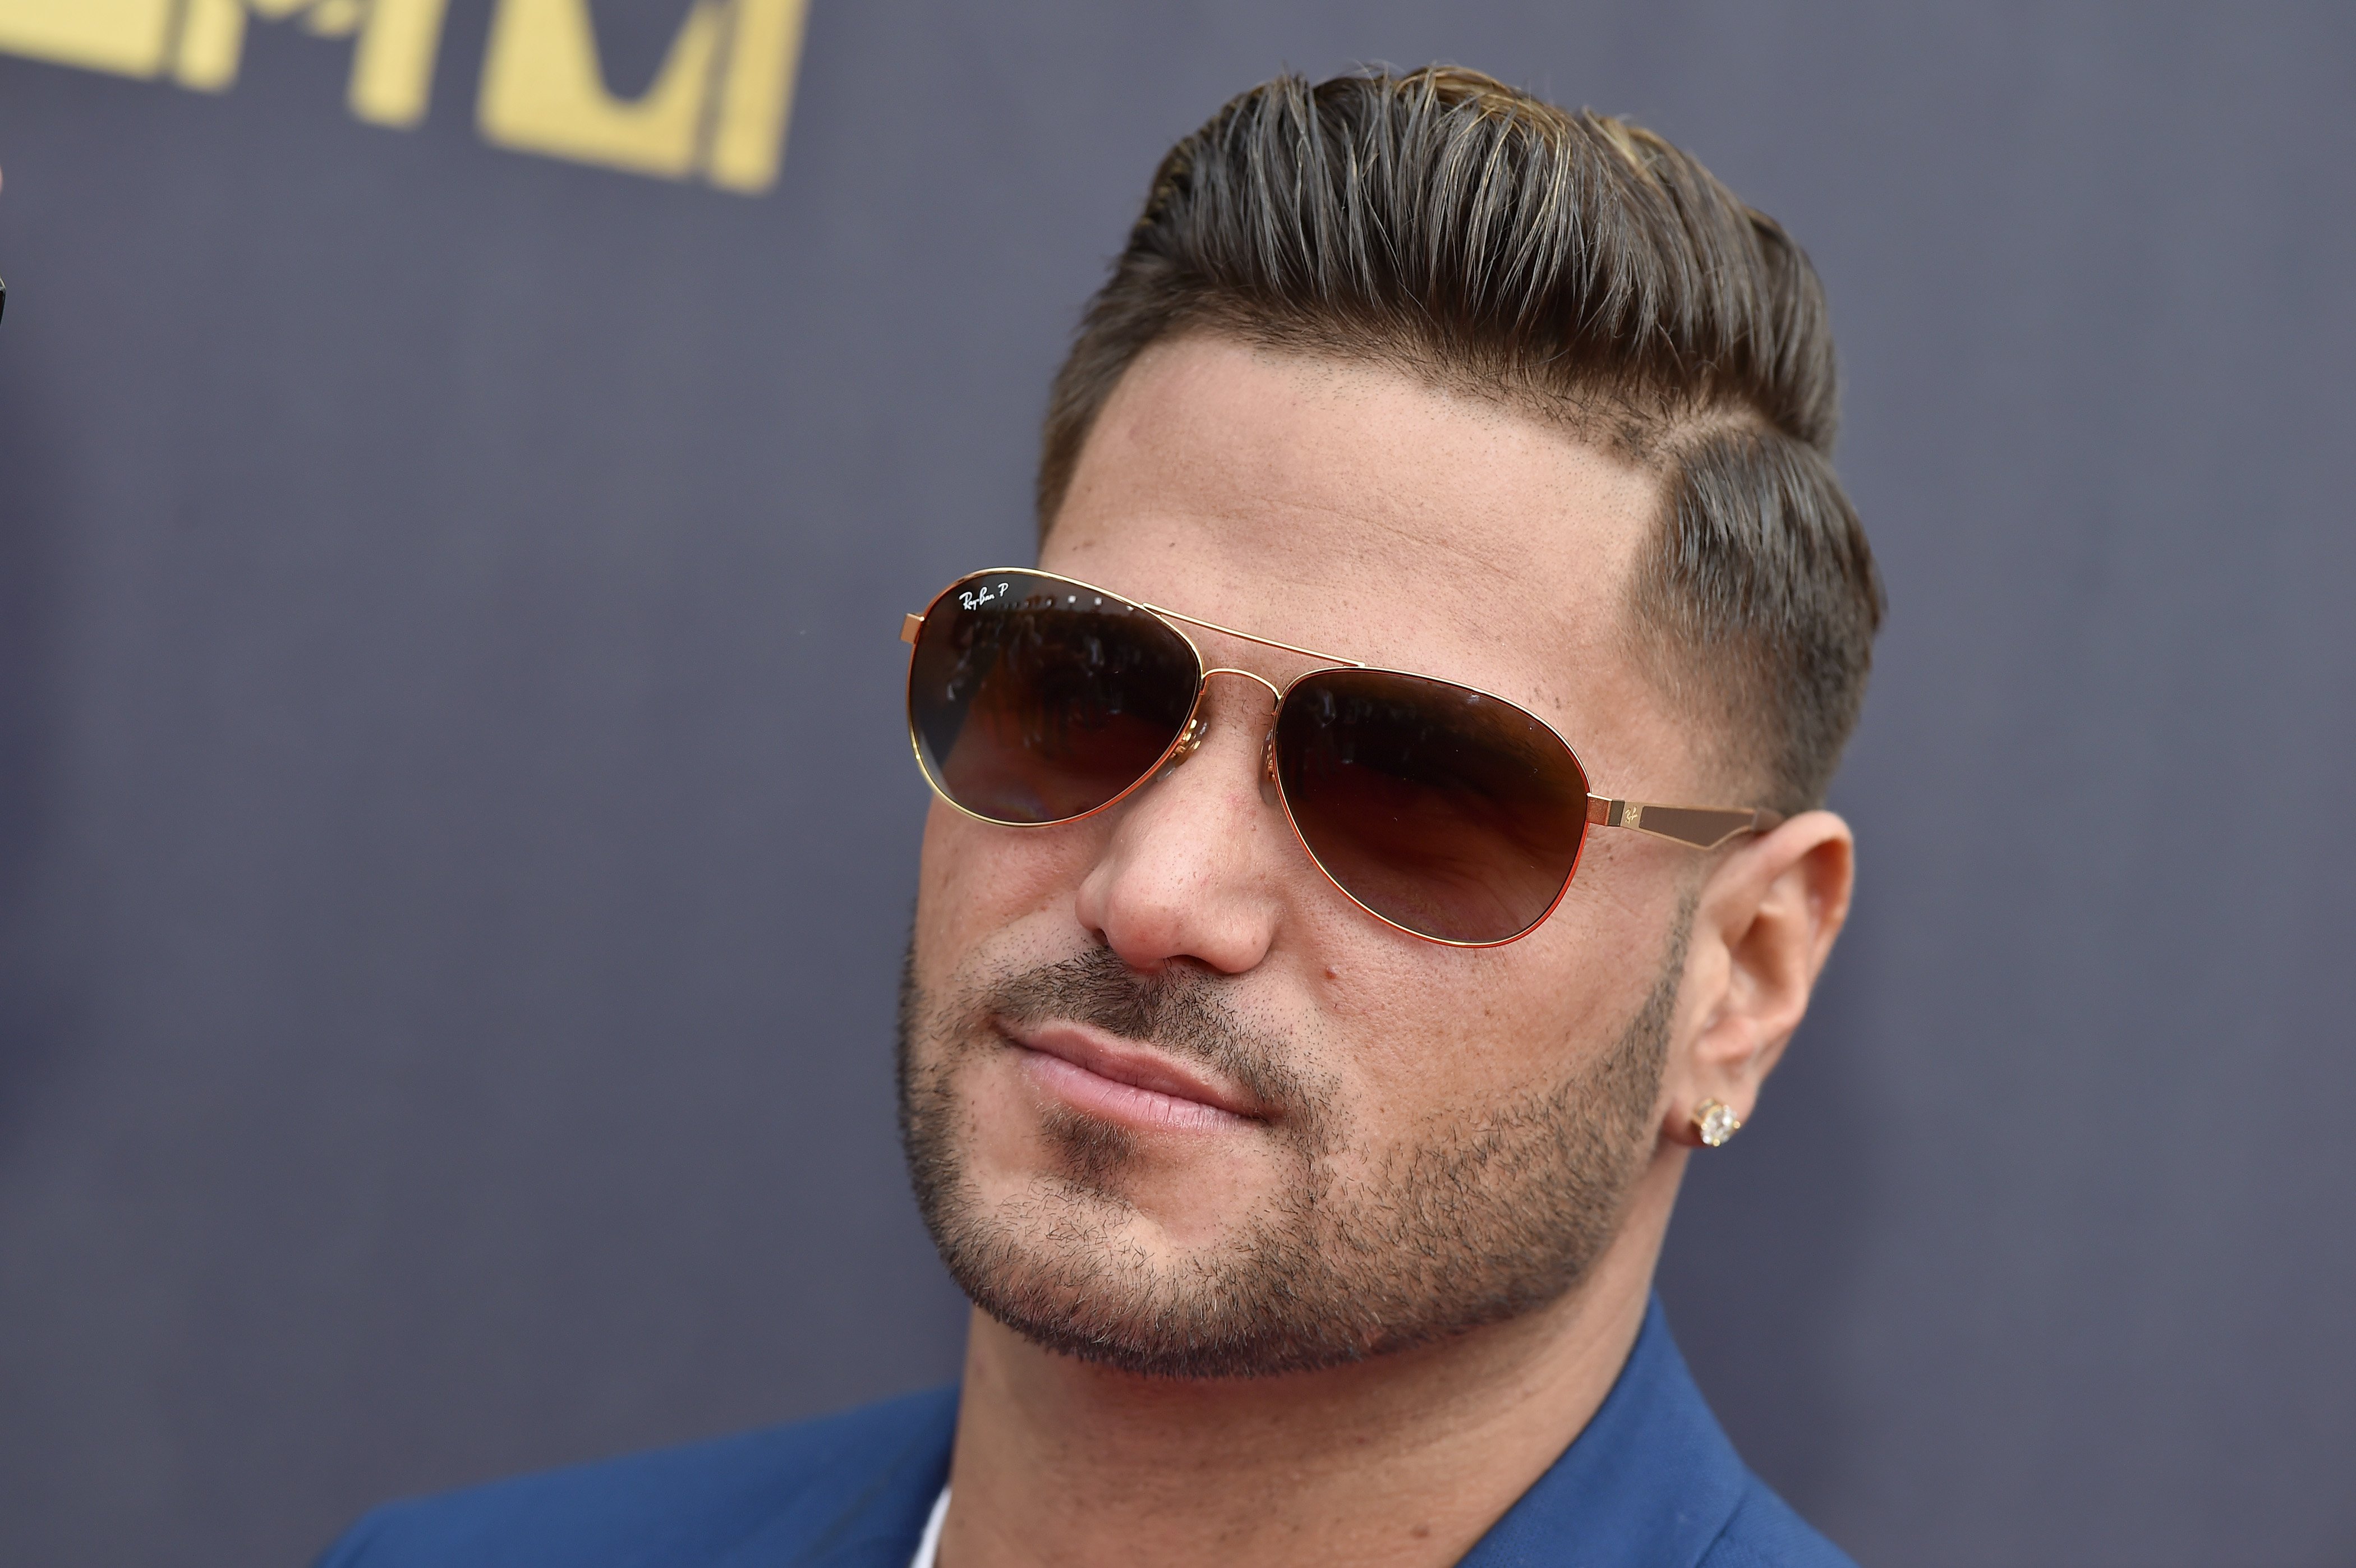 ‘Jersey Shore’: Ronnie Ortiz-Magro’s Fiancé Saffire Matos and Jenn Harley Feud Over Ariana Sky